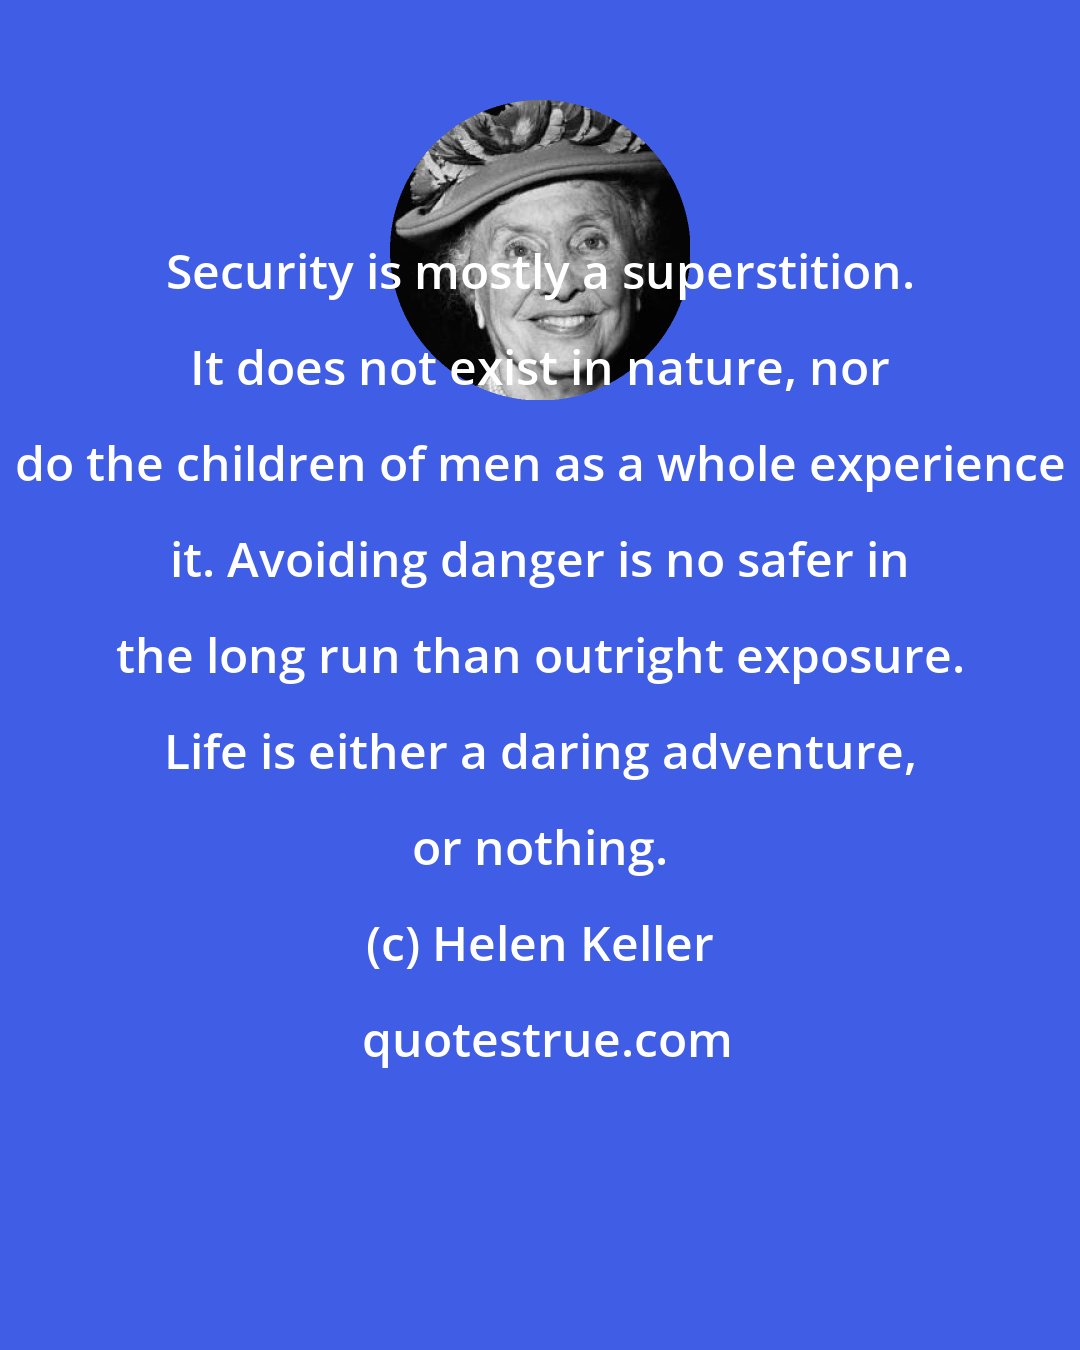 Helen Keller: Security is mostly a superstition. It does not exist in nature, nor do the children of men as a whole experience it. Avoiding danger is no safer in the long run than outright exposure. Life is either a daring adventure, or nothing.